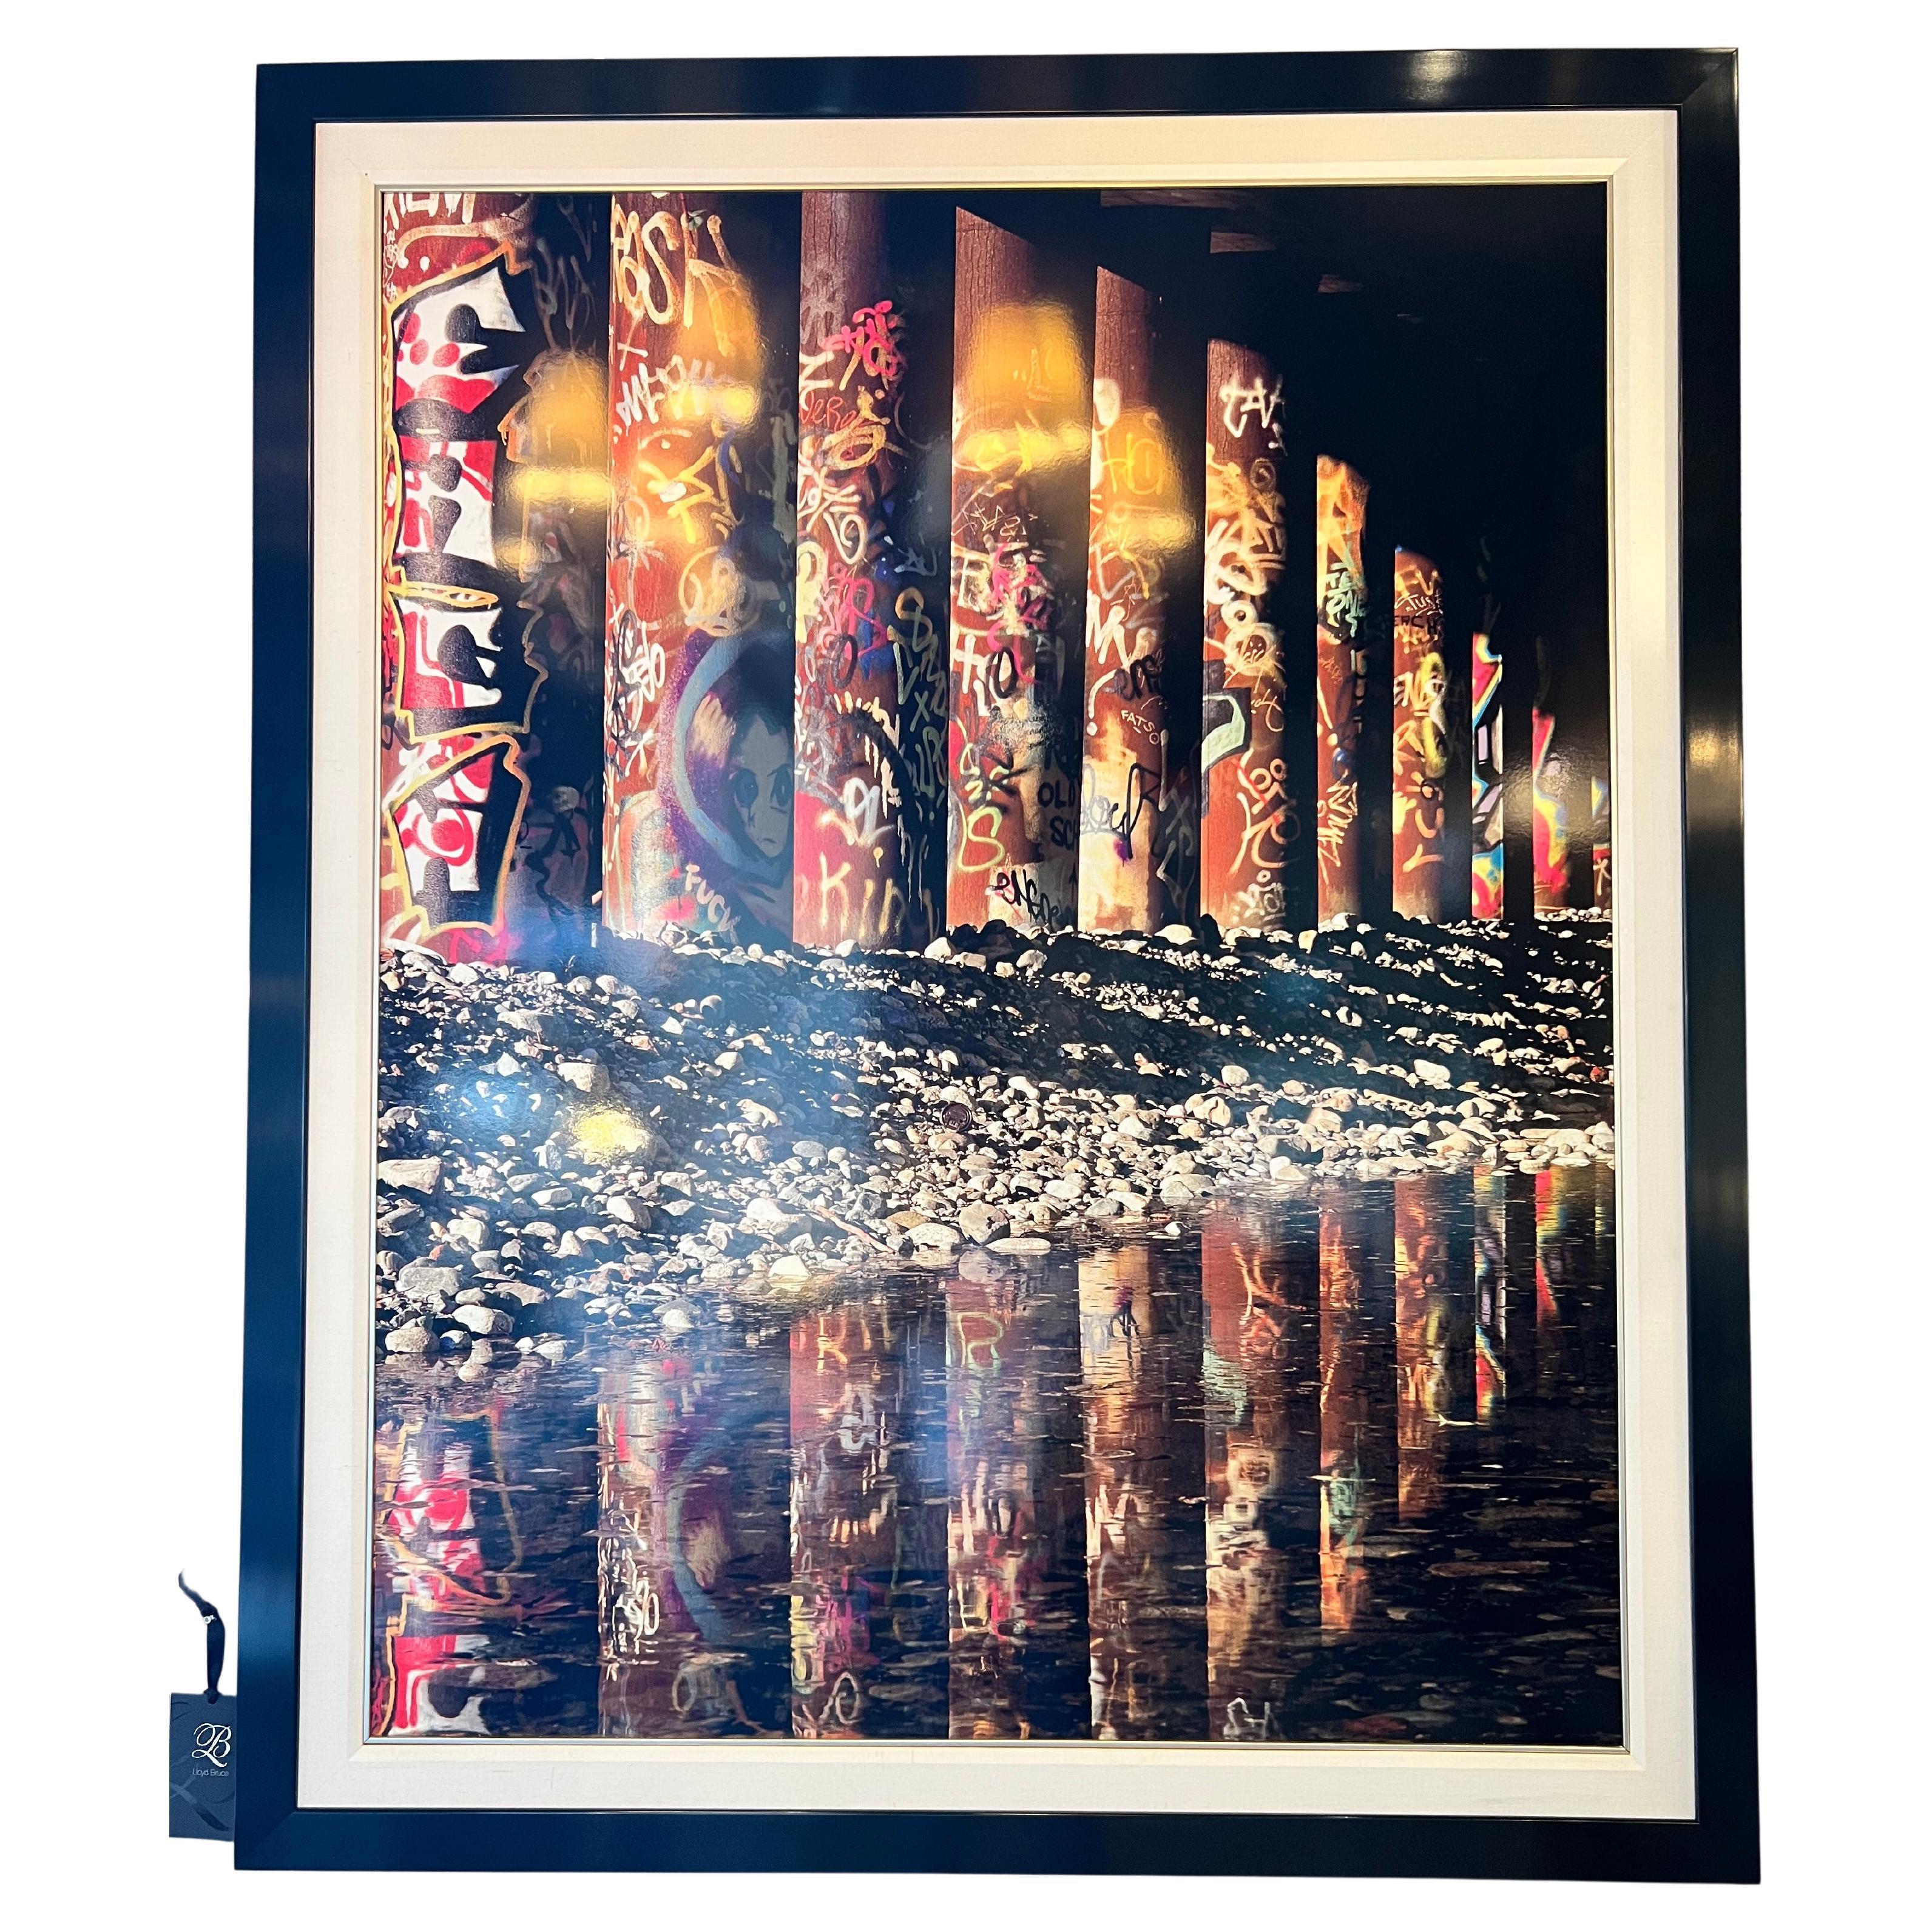 This Printed Photograph on Aluminum with Matte and Frame Is of Bridge Pilings For Sale